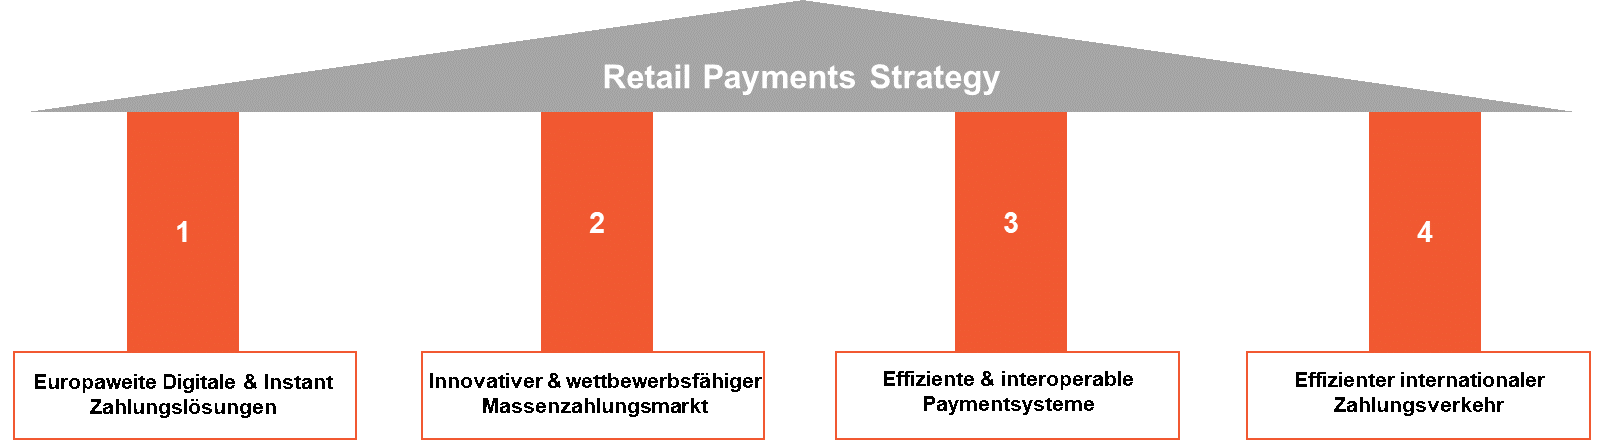 4 Sulen Retail Payments Strategy